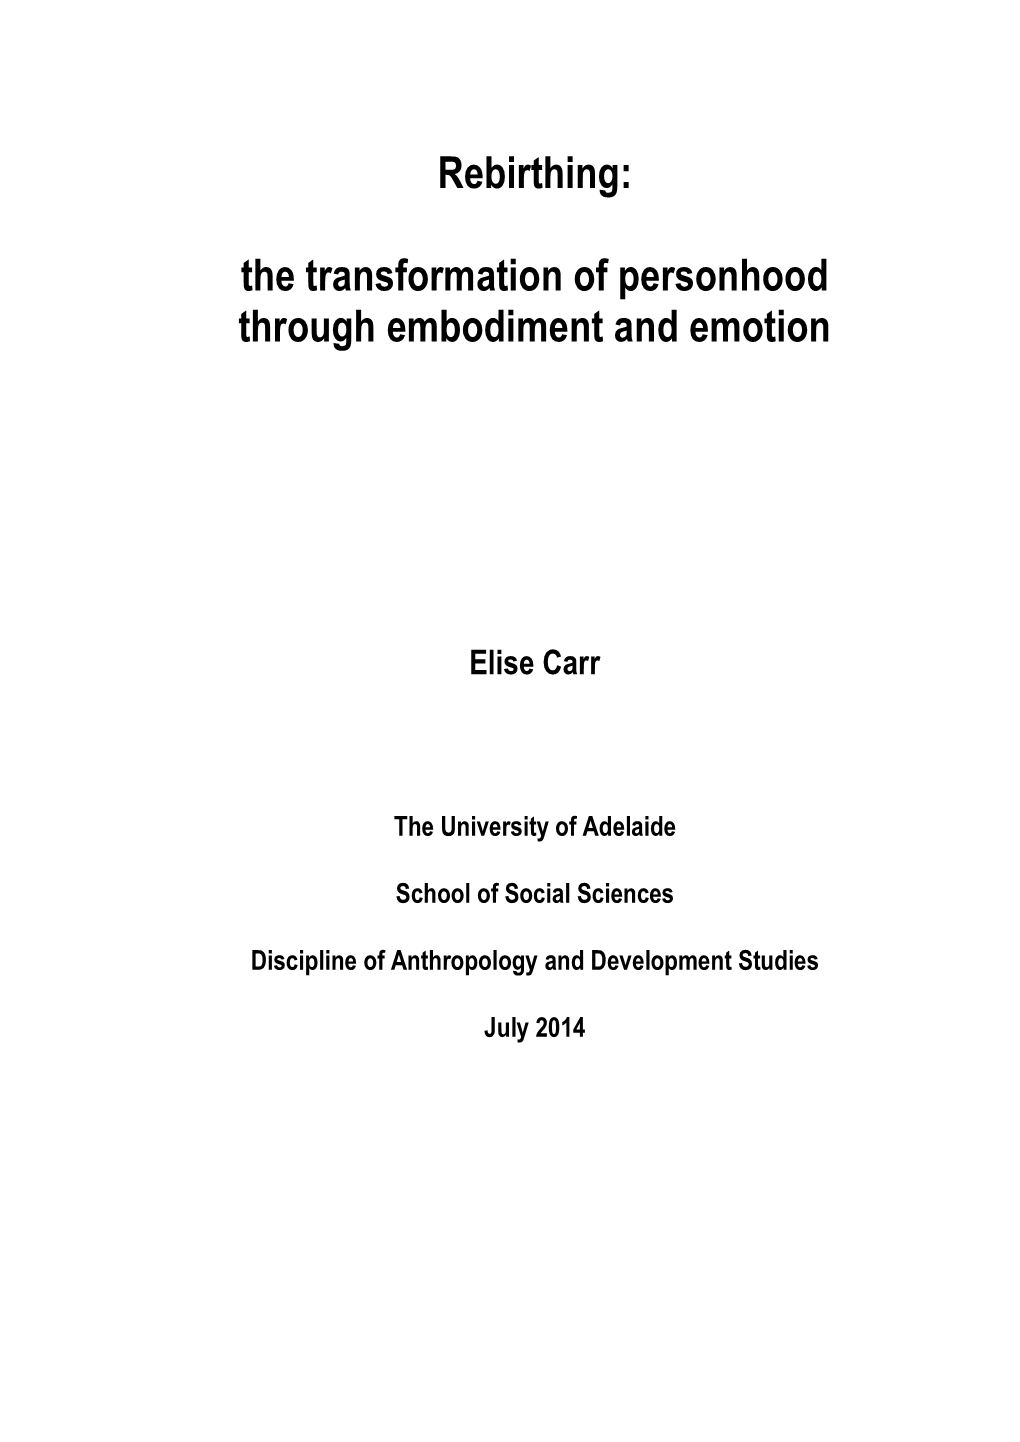 Rebirthing: the Transformation of Personhood Through Embodiment and Emotion